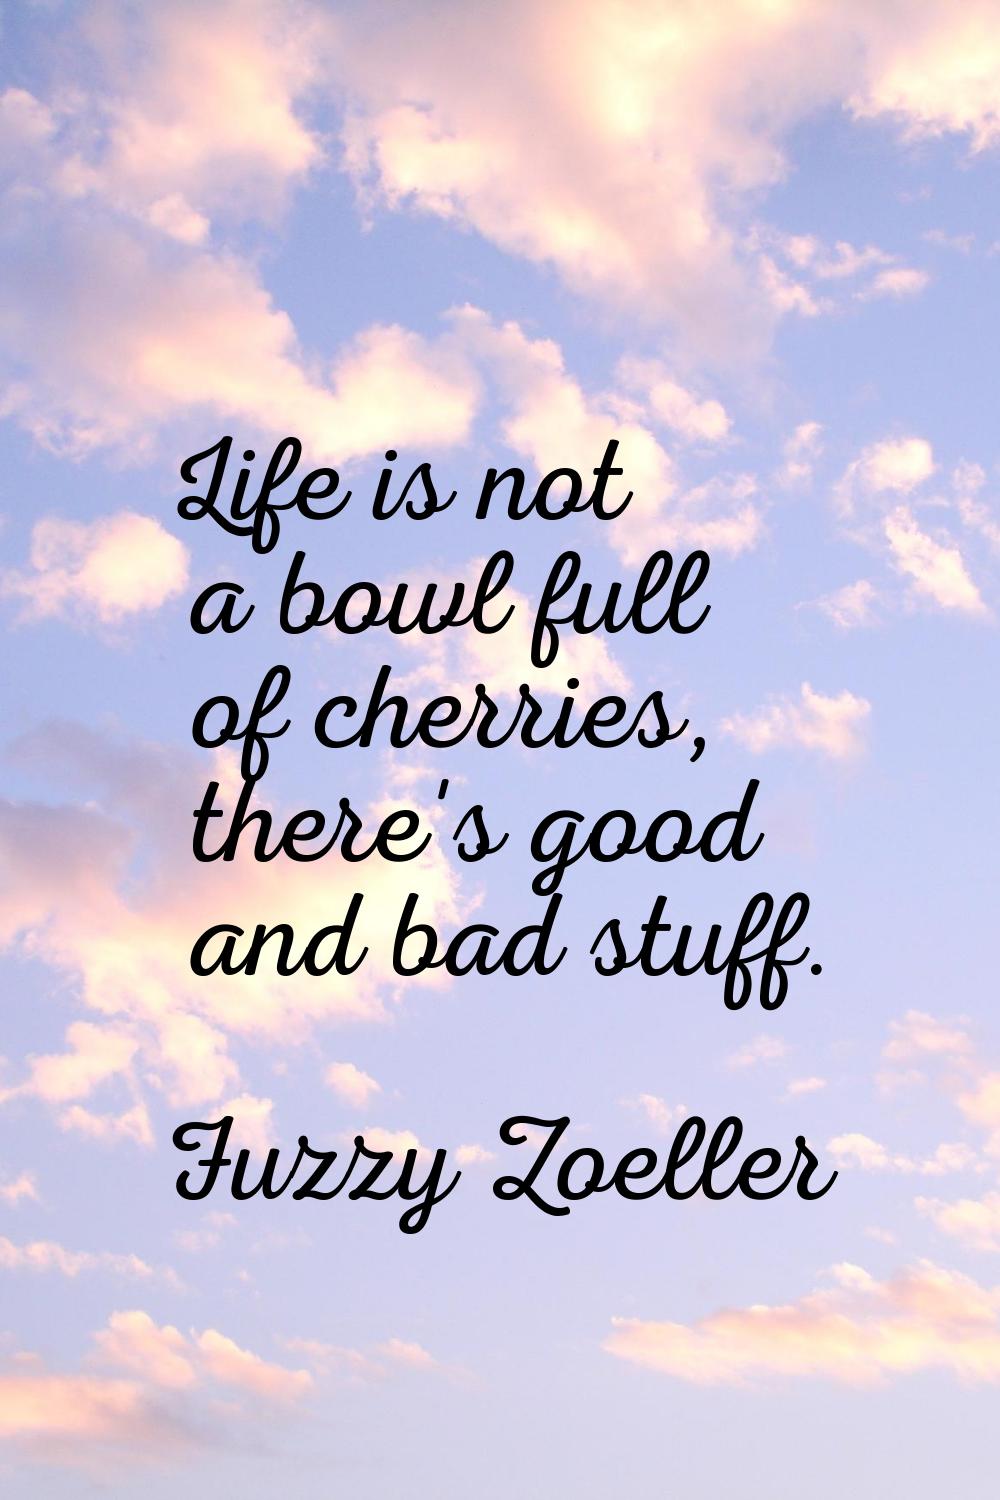 Life is not a bowl full of cherries, there's good and bad stuff.